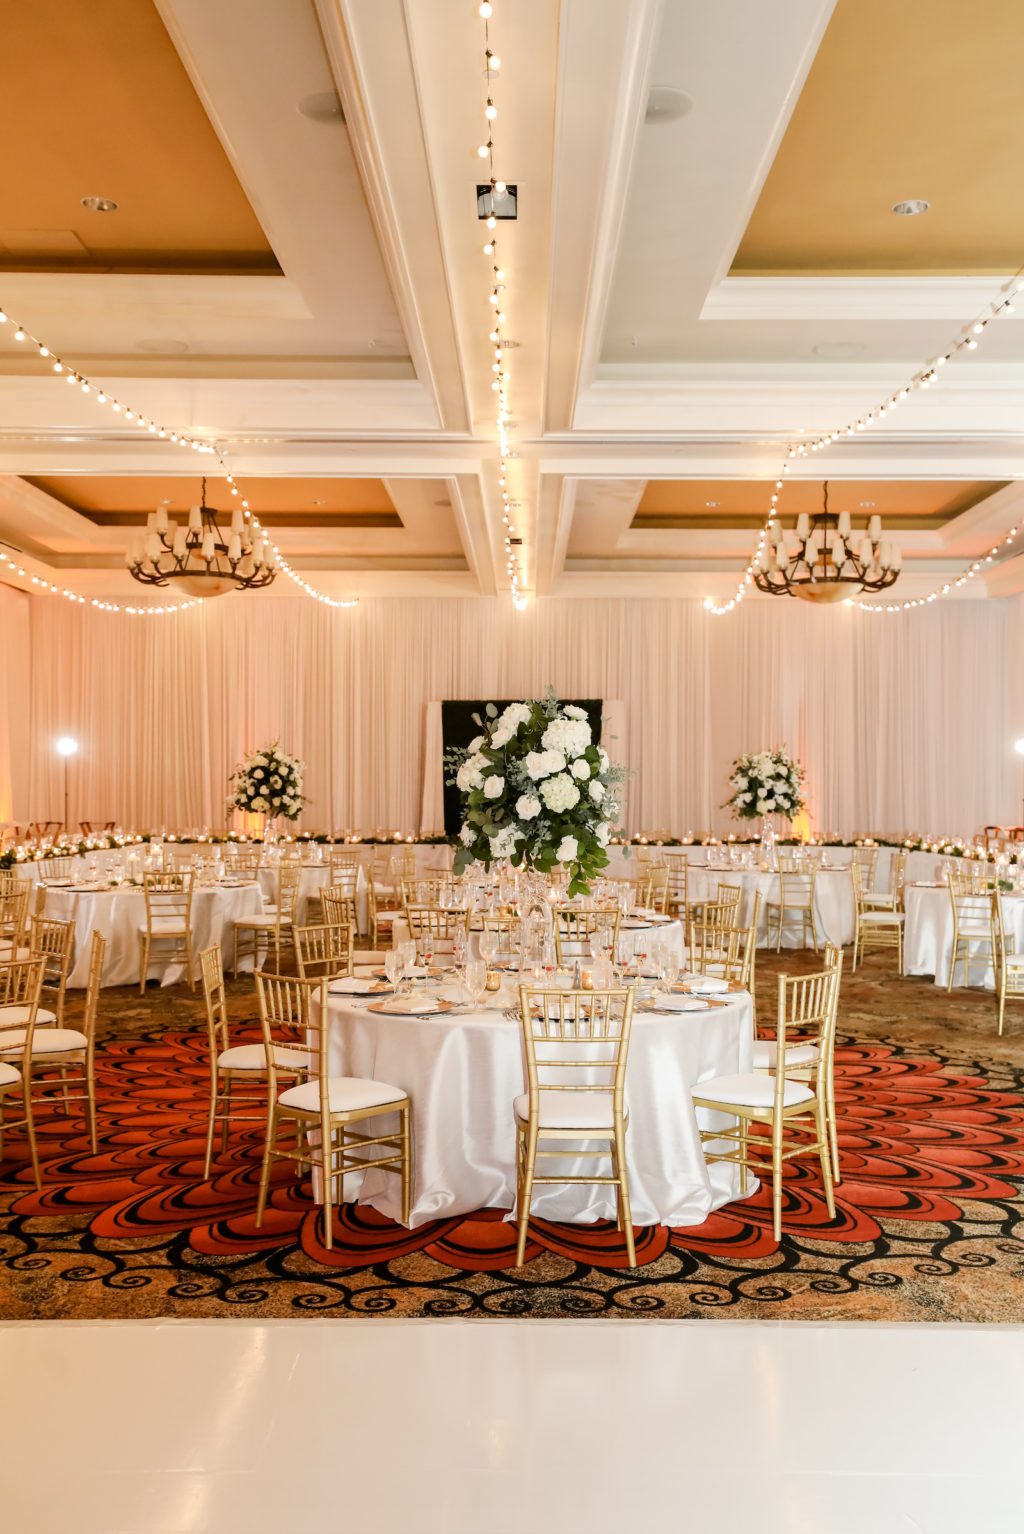 Elegant Timeless Wedding Reception Ballroom Decor, String Lights on Ceiling, Gold Chiavari Chairs, Tall White and Greenery Floral Centerpieces | Tampa Bay Wedding Photographer Lifelong Photography Studio | Clearwater Beach Wedding Venue Sandpearl Resort | Wedding Planner Blue Skies Weddings and Events | Wedding Florist Iza's Flowers